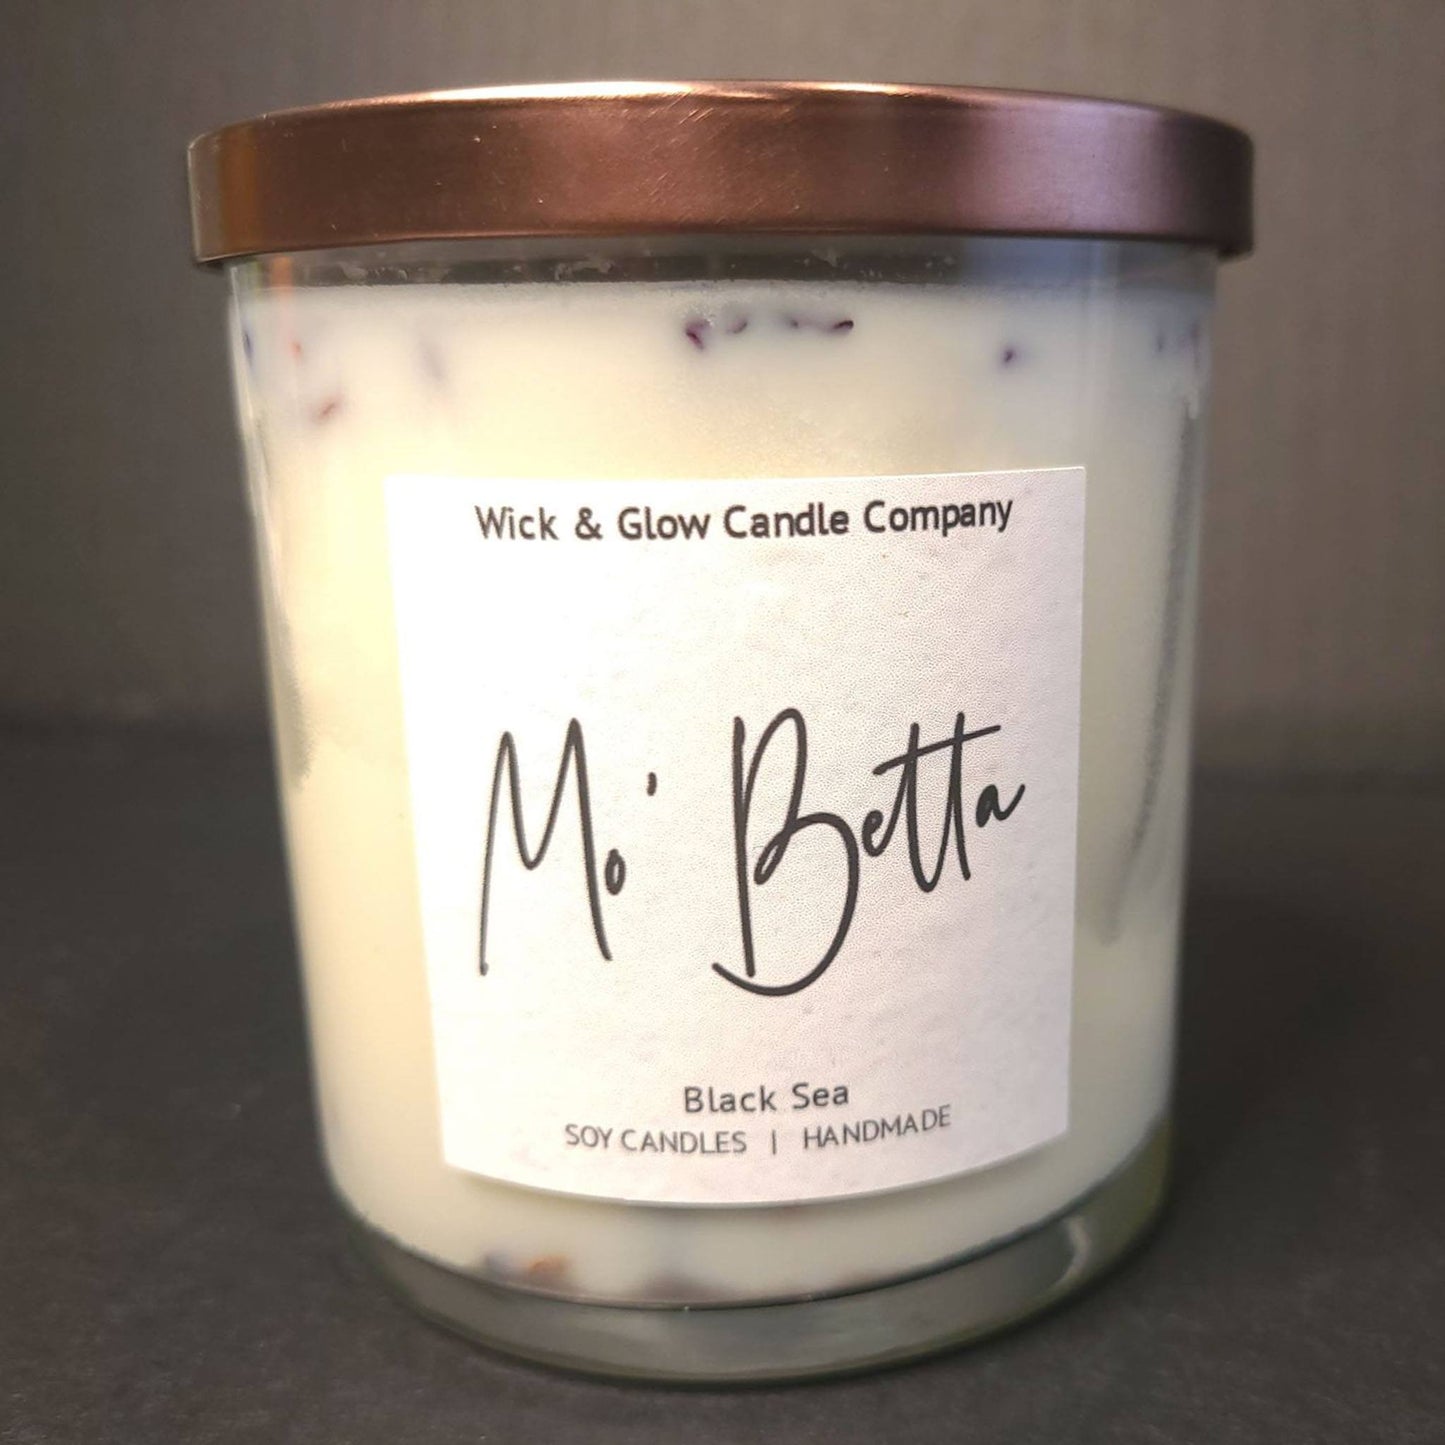 Mo' Betta -Black Sea Luxury Scented Candle - The Wick and Glow Candle Company